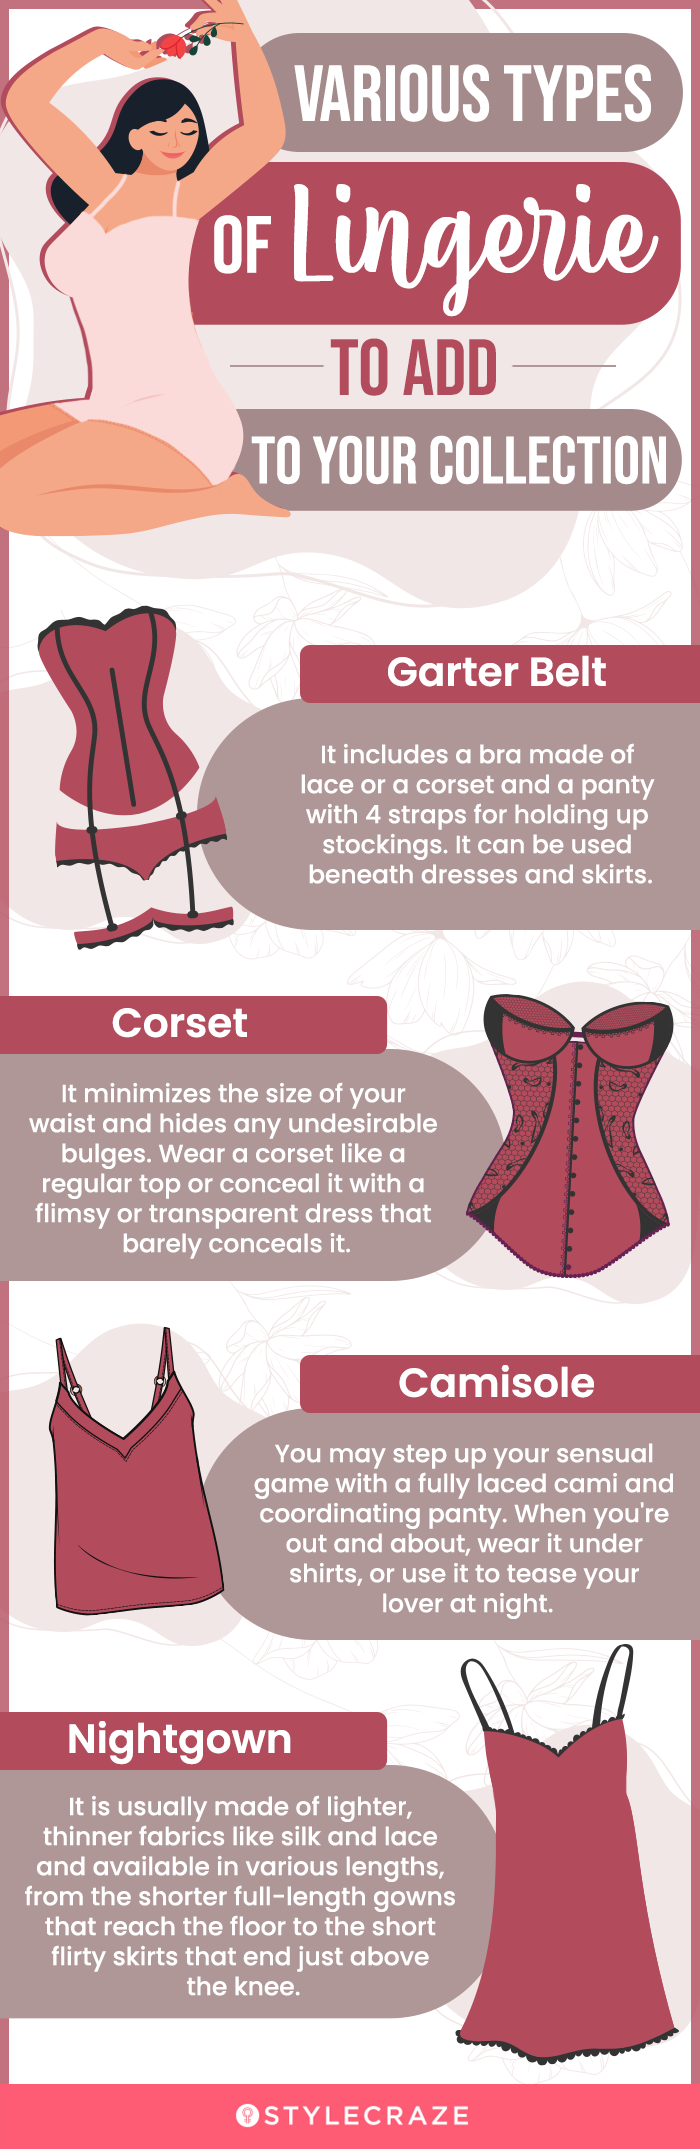 Explore the diverse world of lingerie and body types